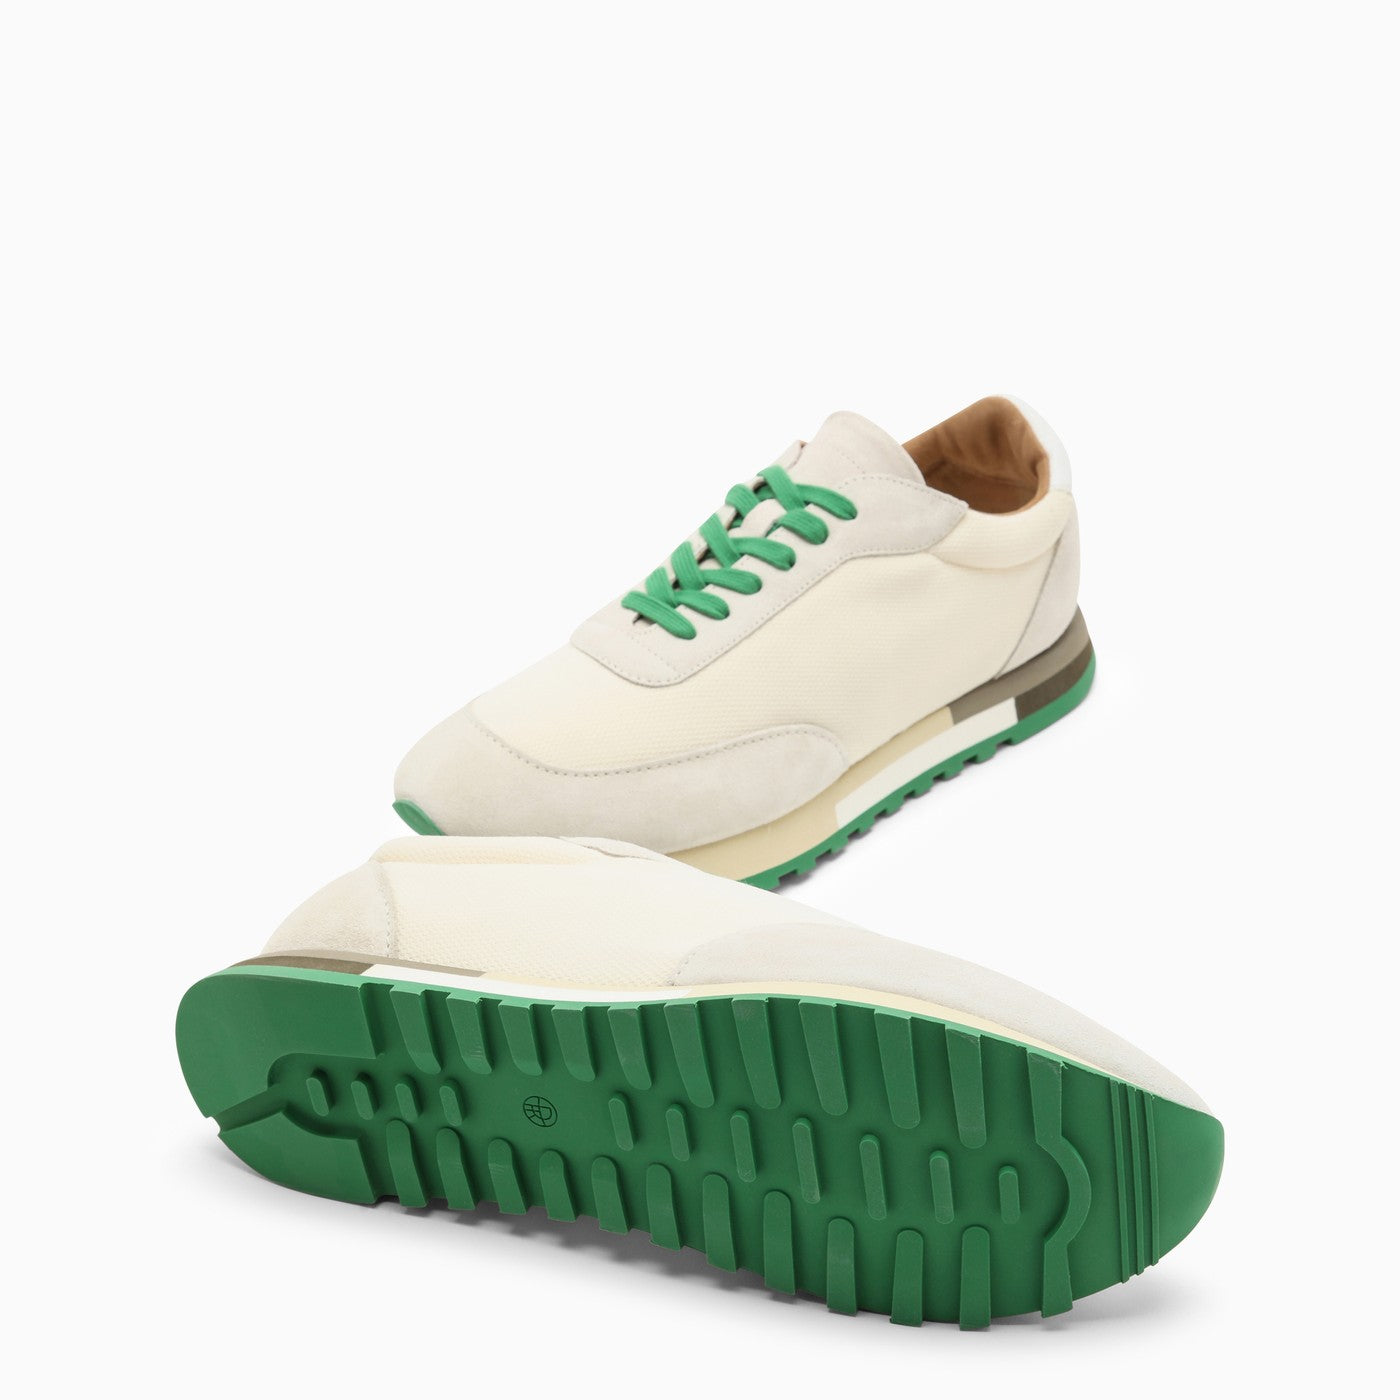 The Row Low Owen Runner Ivory/Green Trainer